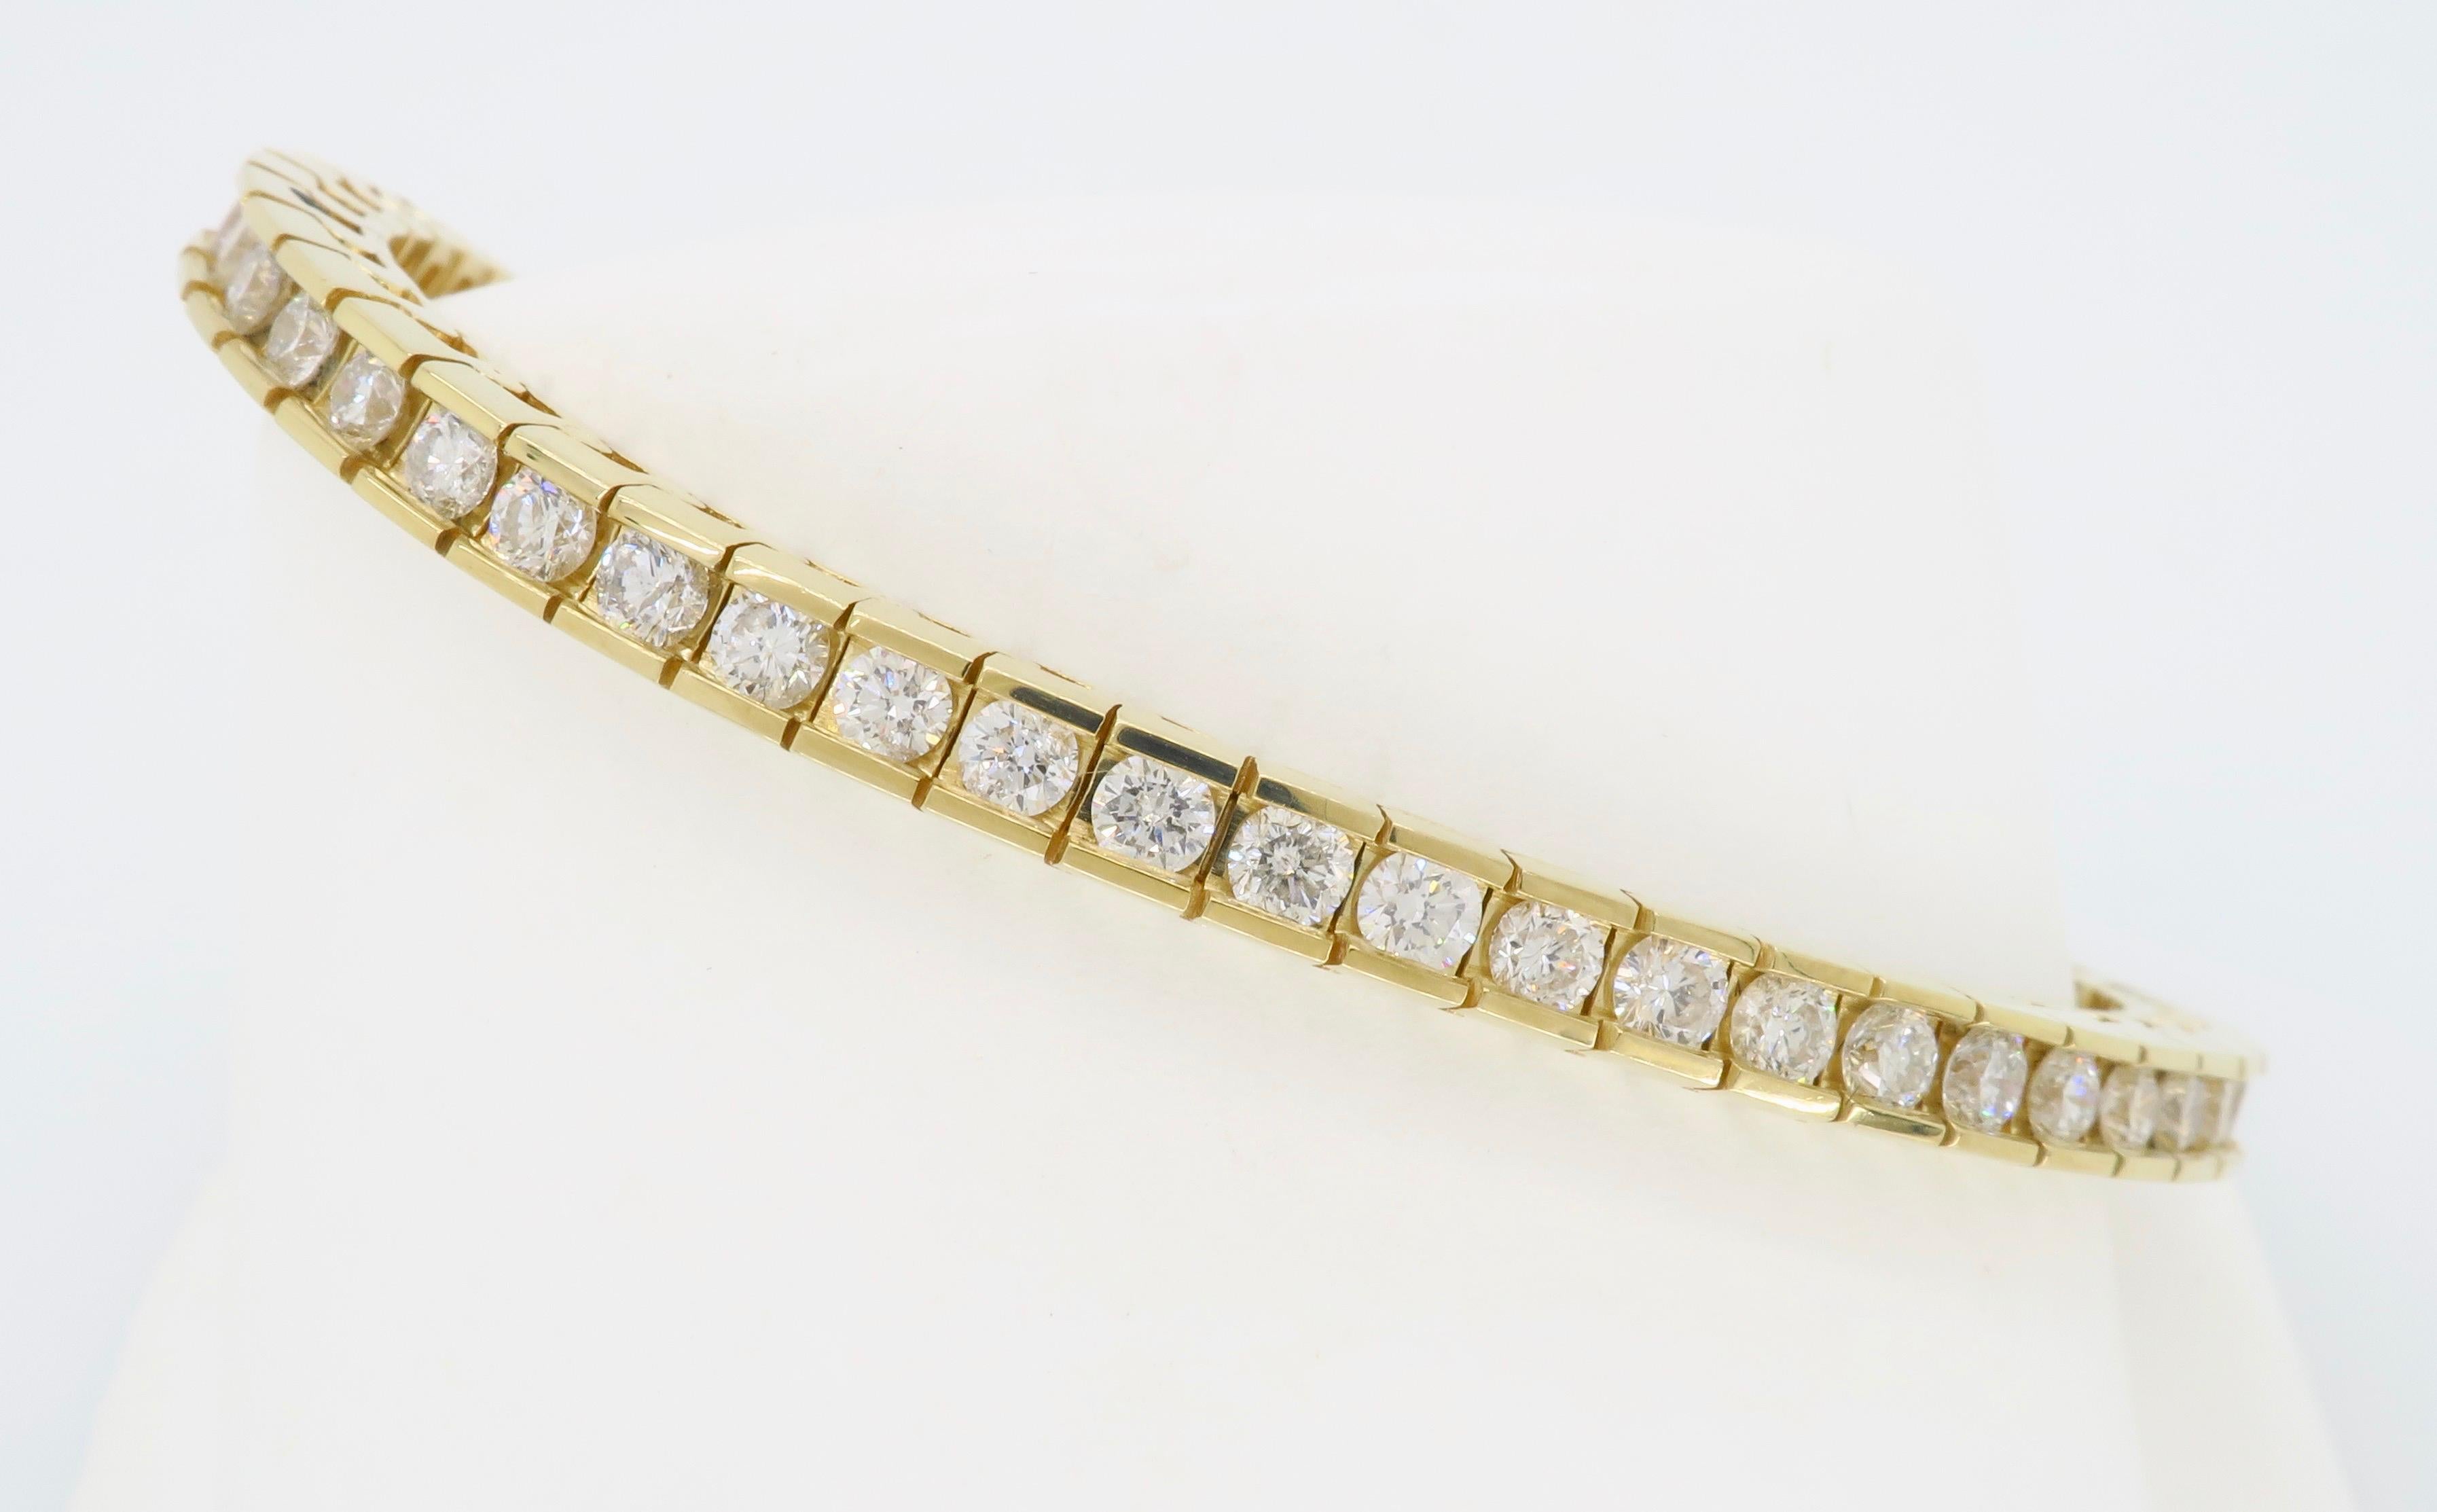 Classic 14k yellow gold diamond tennis bracelet with 5.50ctw of channel set Round Brilliant cut diamonds. 

Diamond Carat Weight: Approximately 5.50CTW
Diamond Cut: 56 Round Brilliant Cut Diamonds
Color: Average G-I
Clarity: Average SI2-I1
Metal: